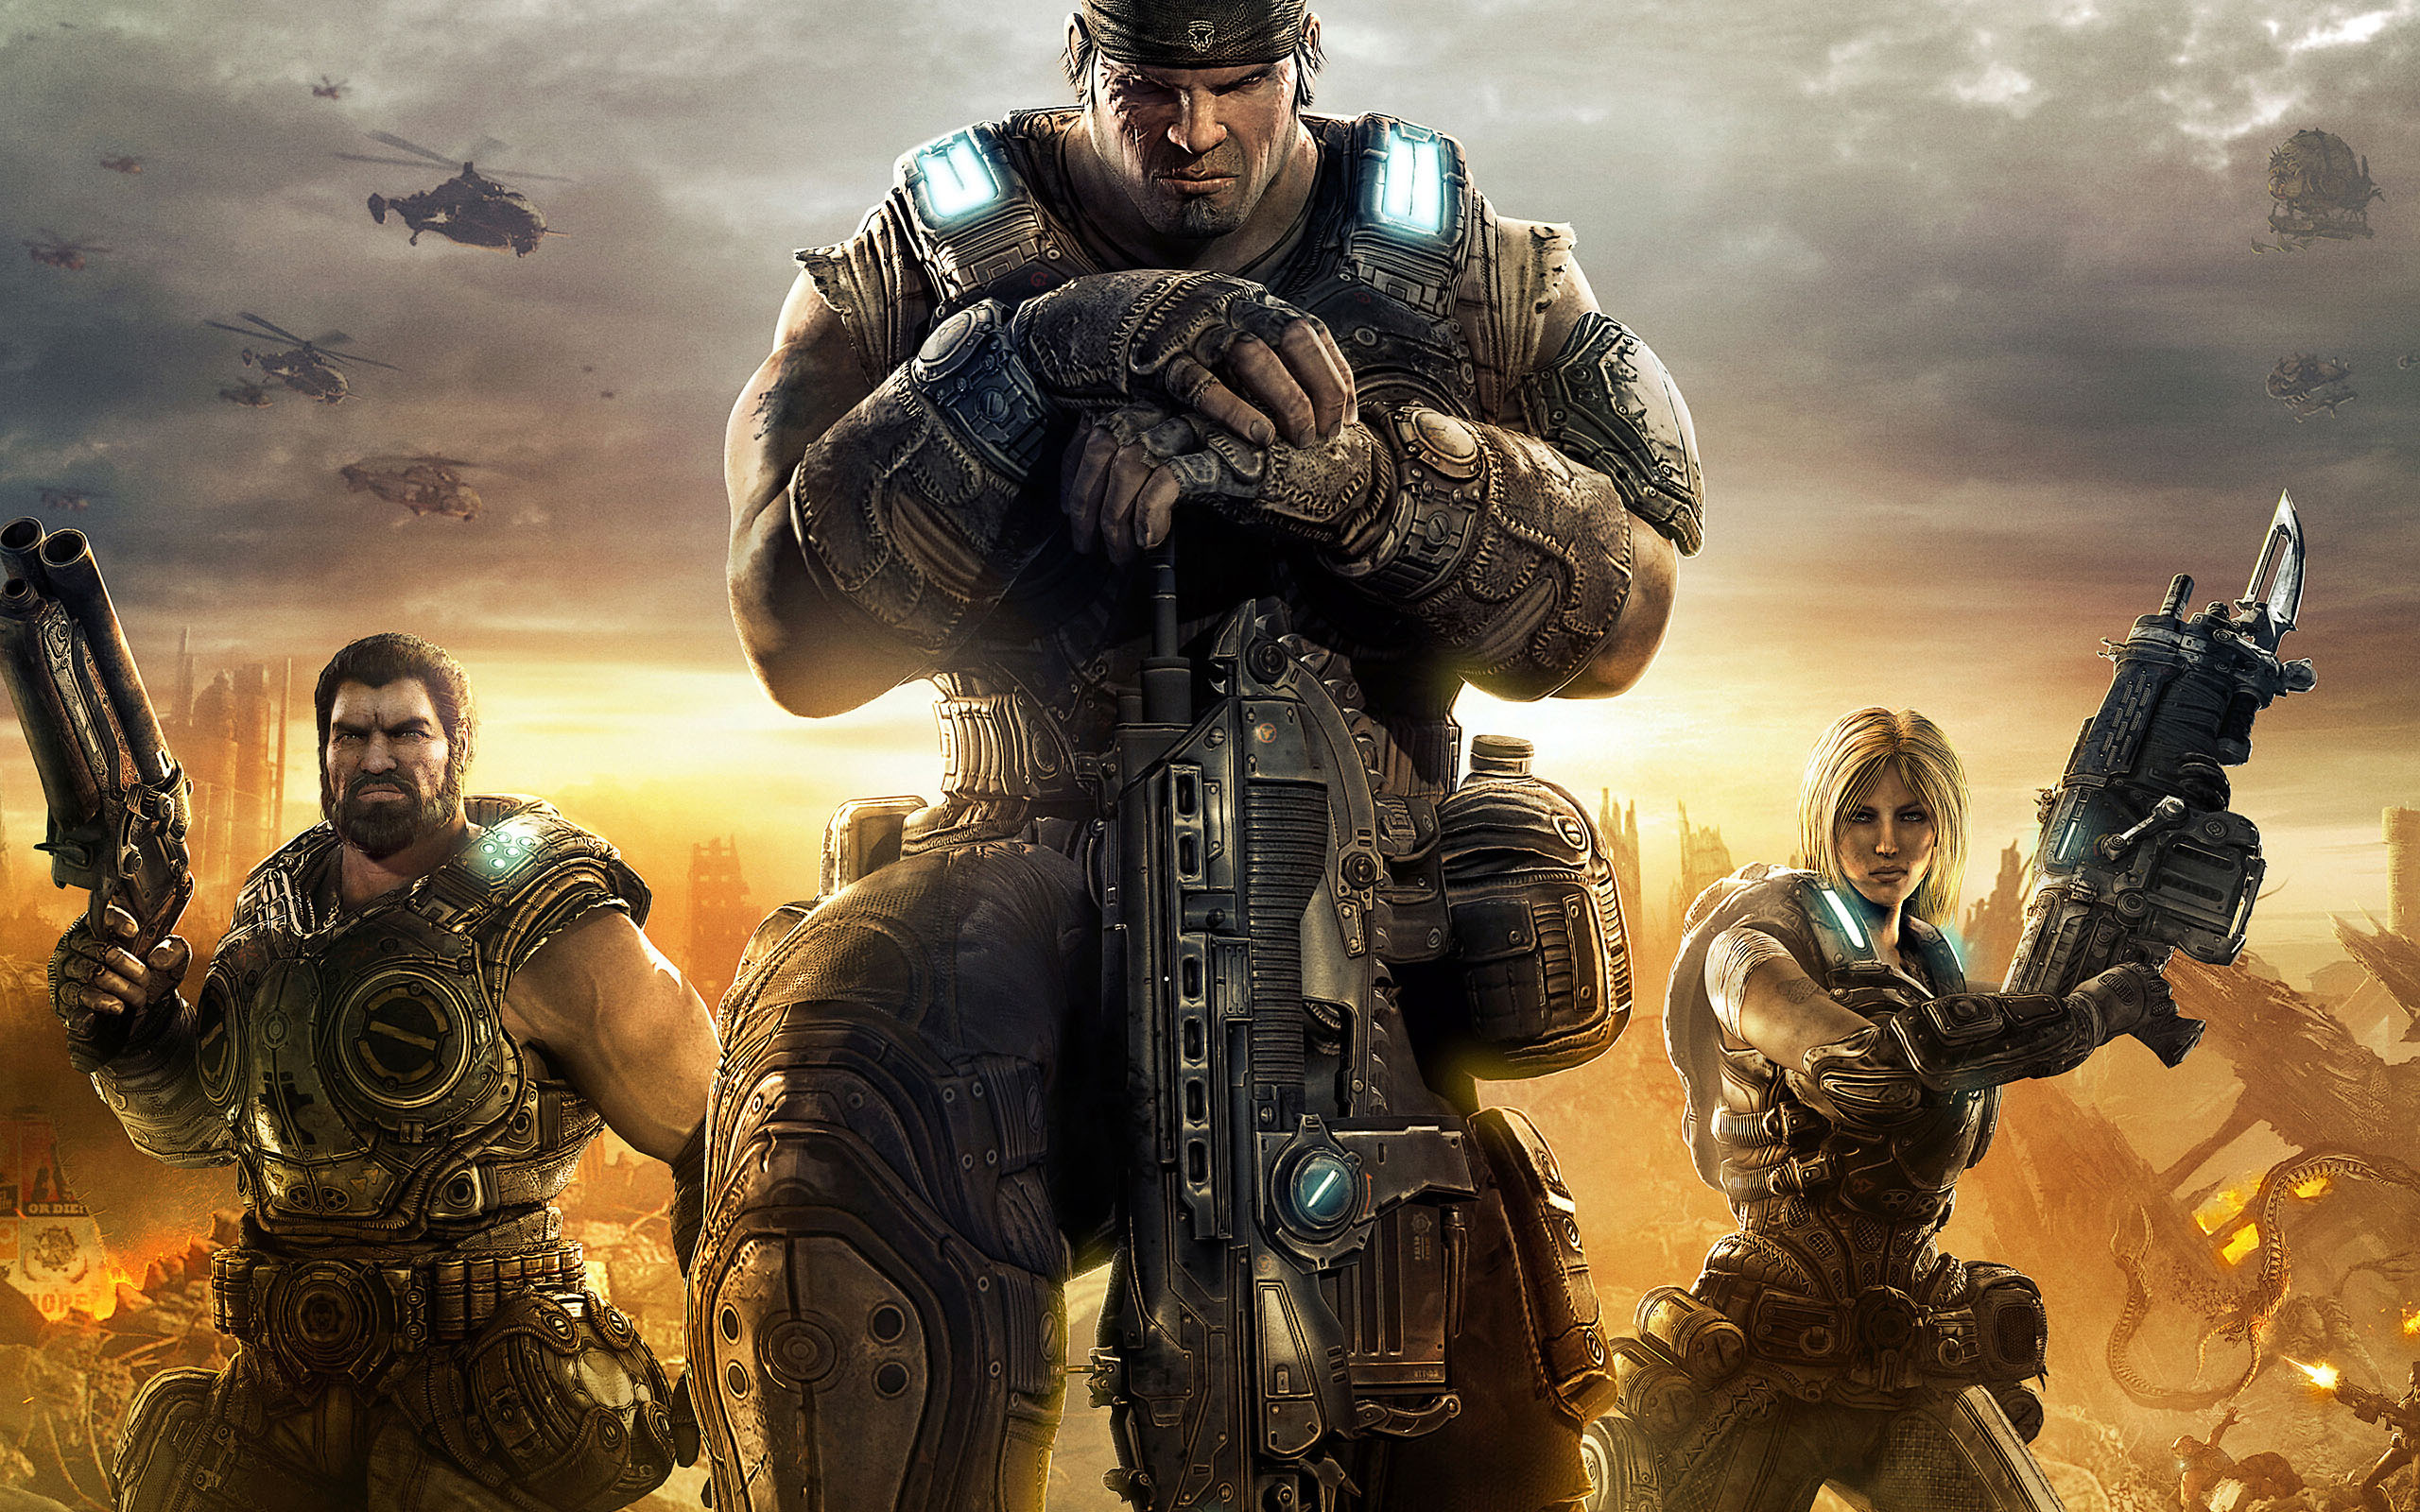 Gears Of War 3 Full HD Wallpaper and Background Image | 2560x1600 | ID